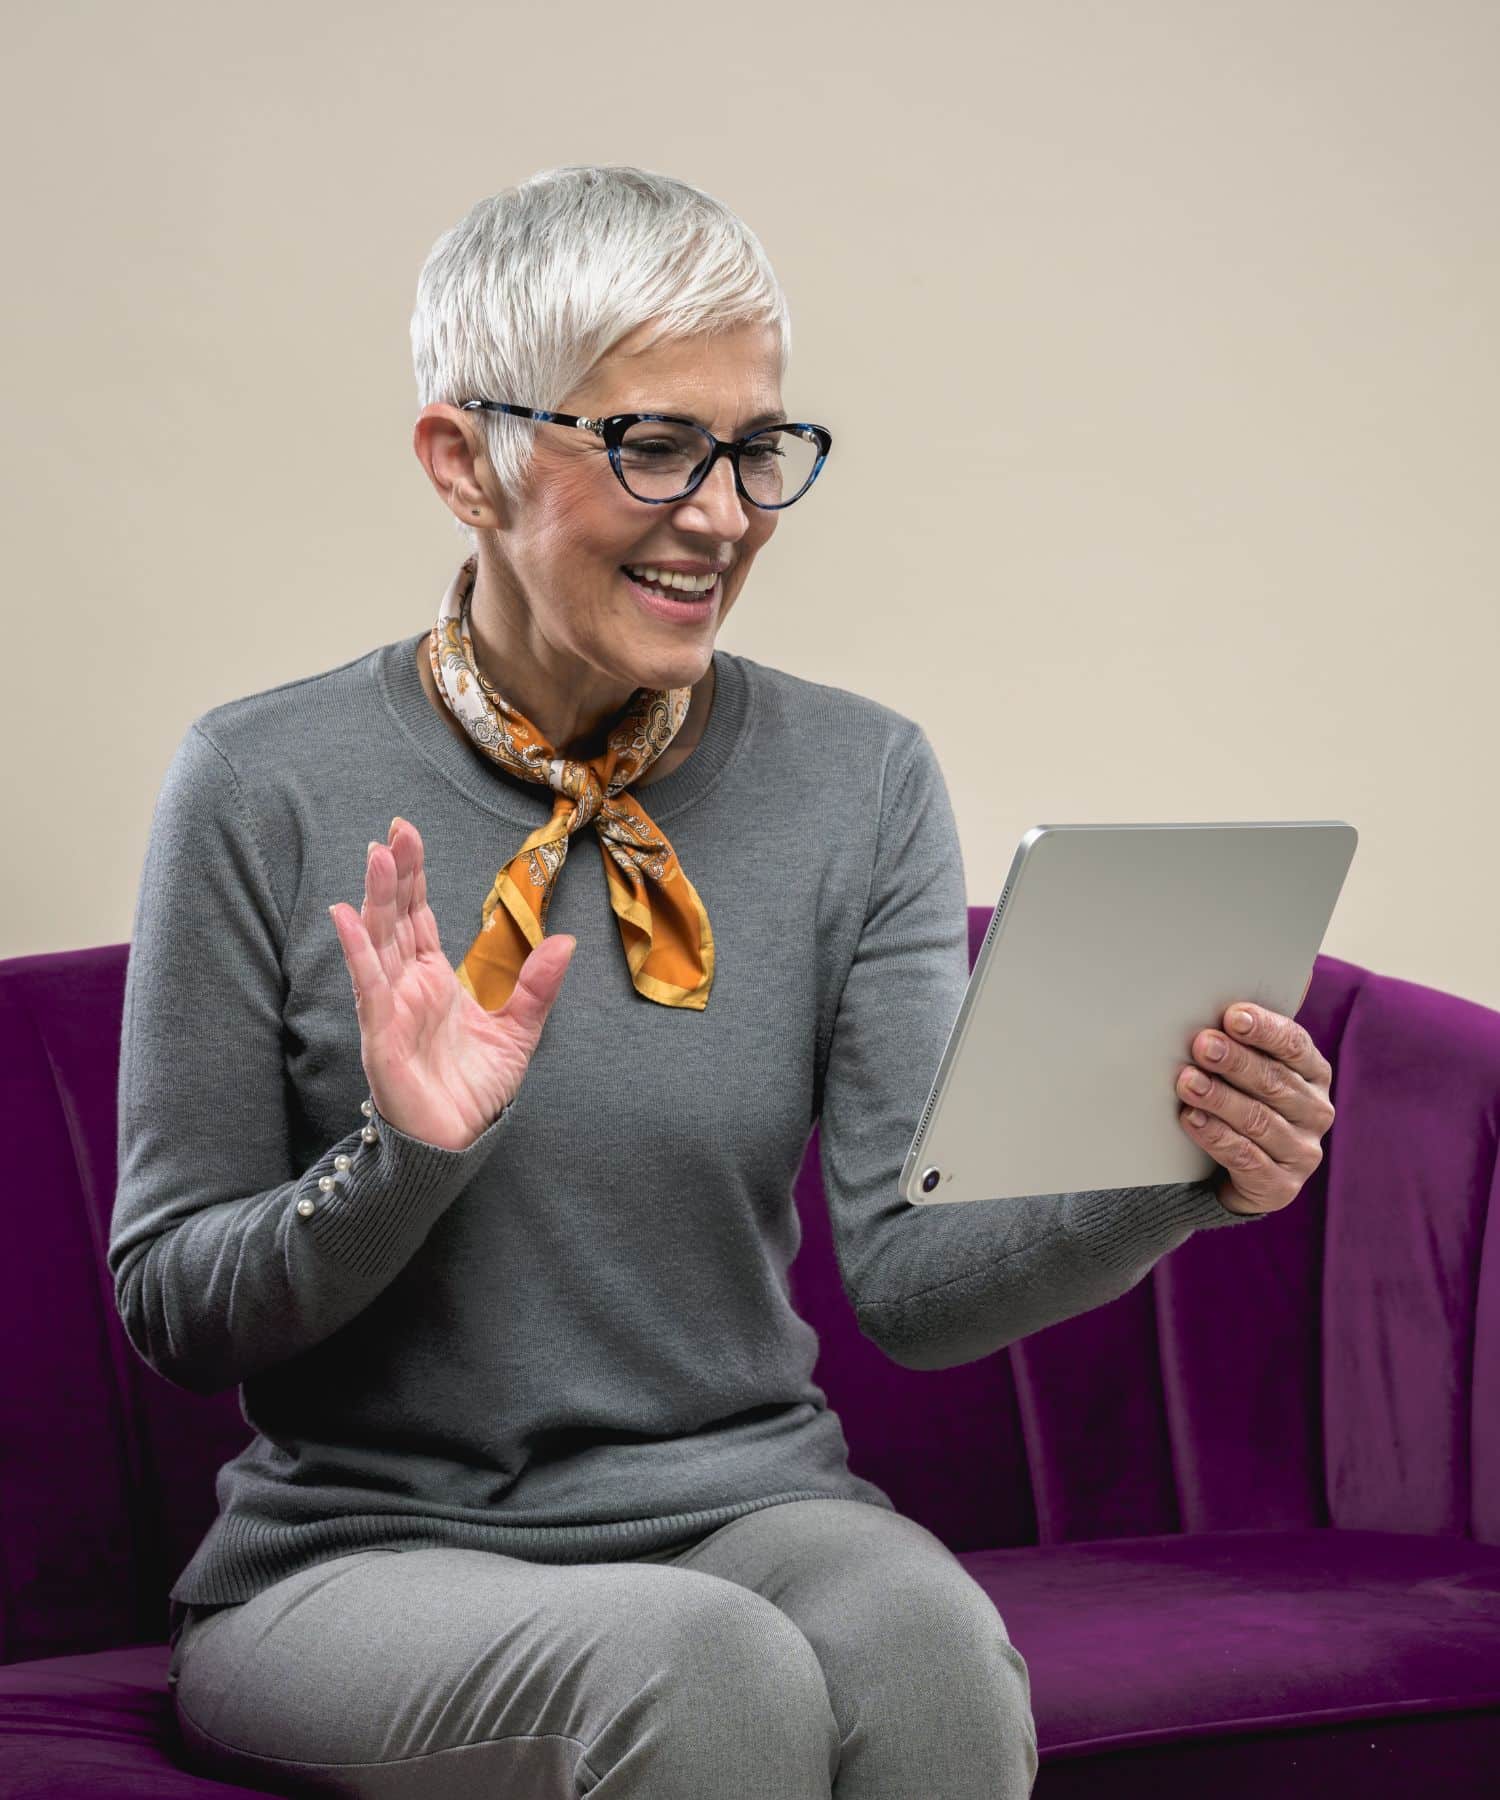 woman sitting on a purple couch talking to someone on a tablet